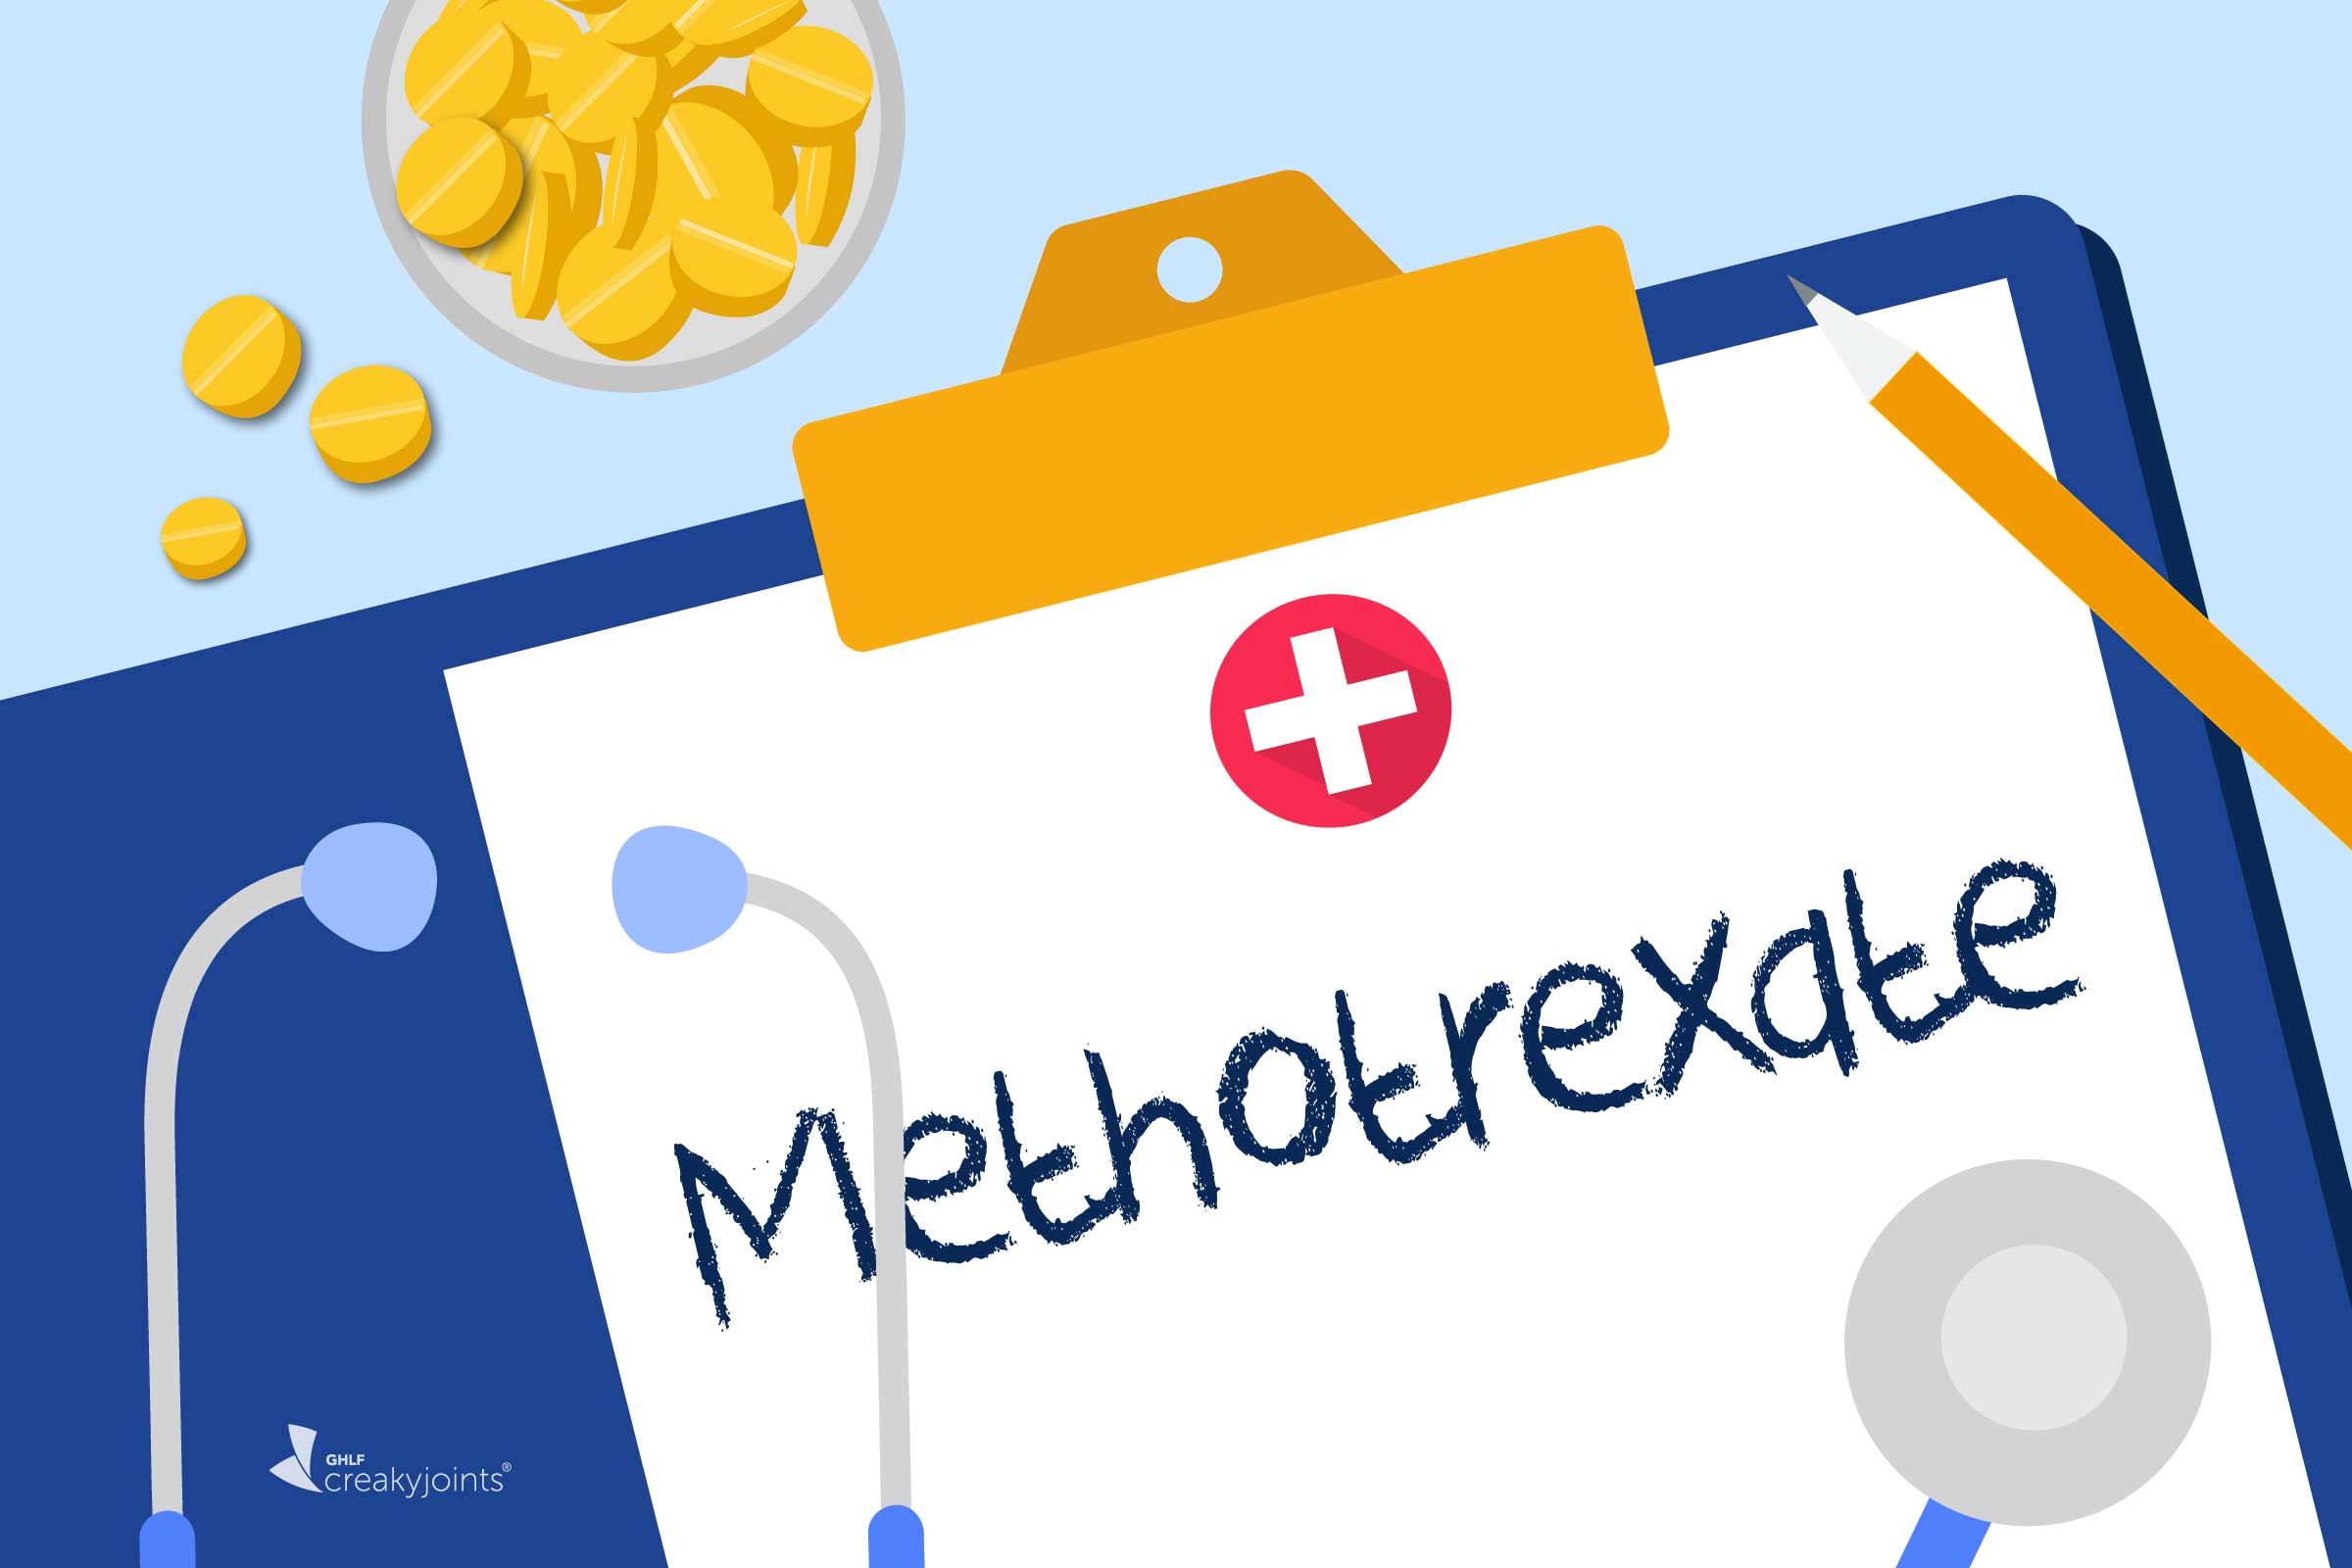 Methotrexate Reduces Inflammation and Damage in Knee Osteoarthritis